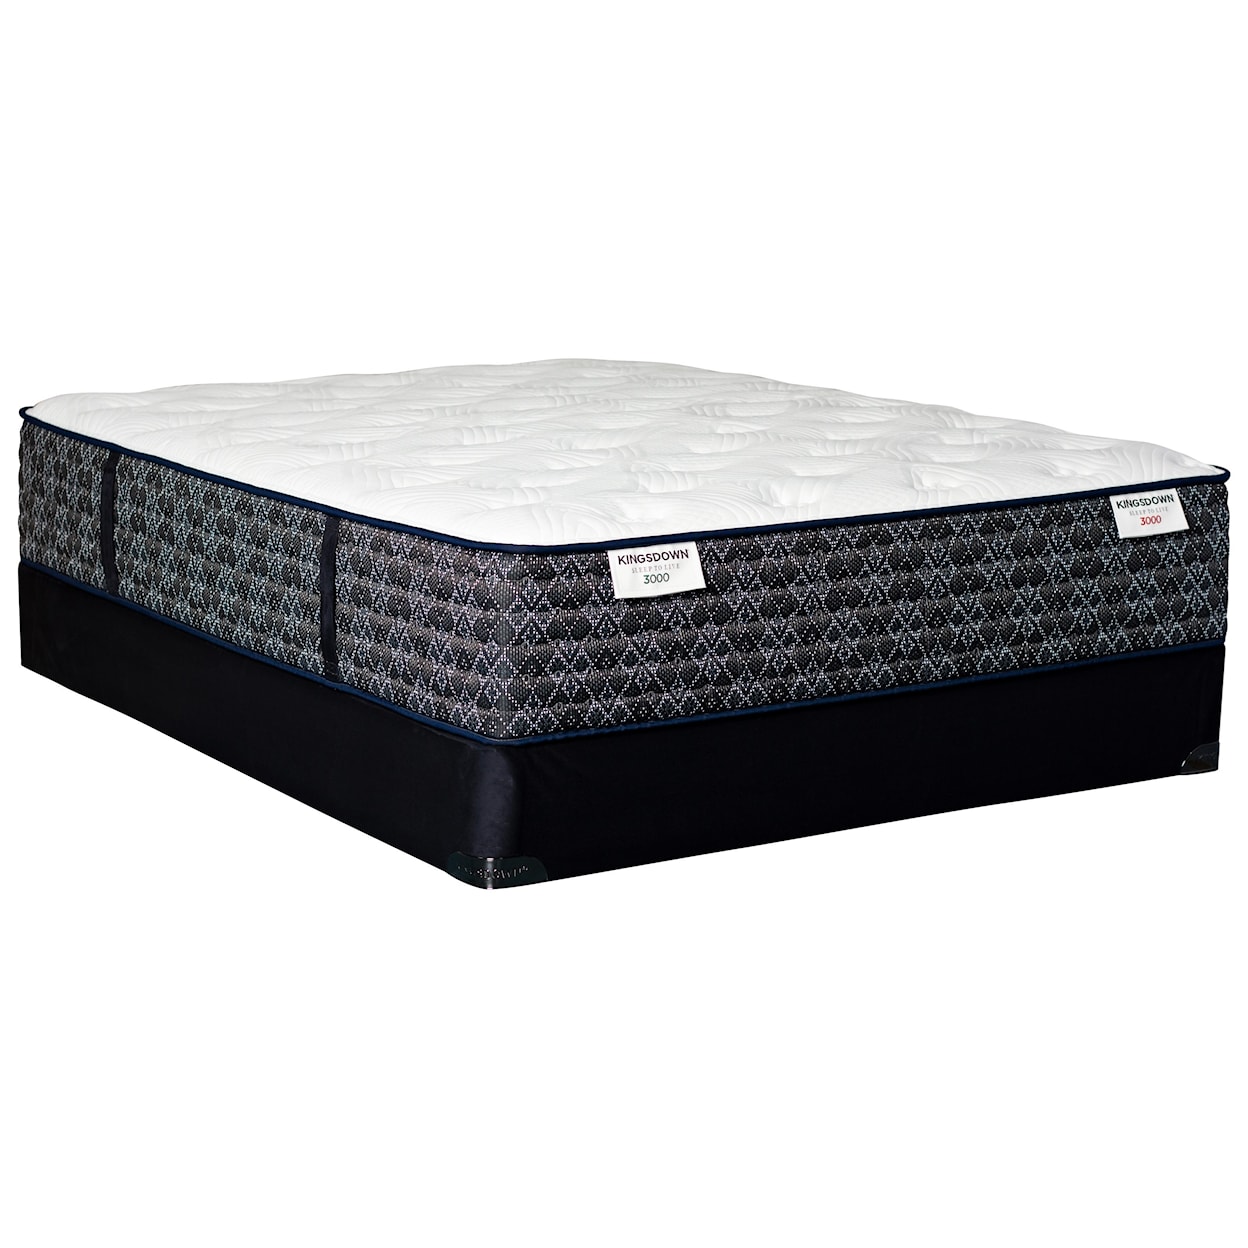 Kingsdown Sleep to Live 3000 Green Red King Pocketed Coil Mattress Set